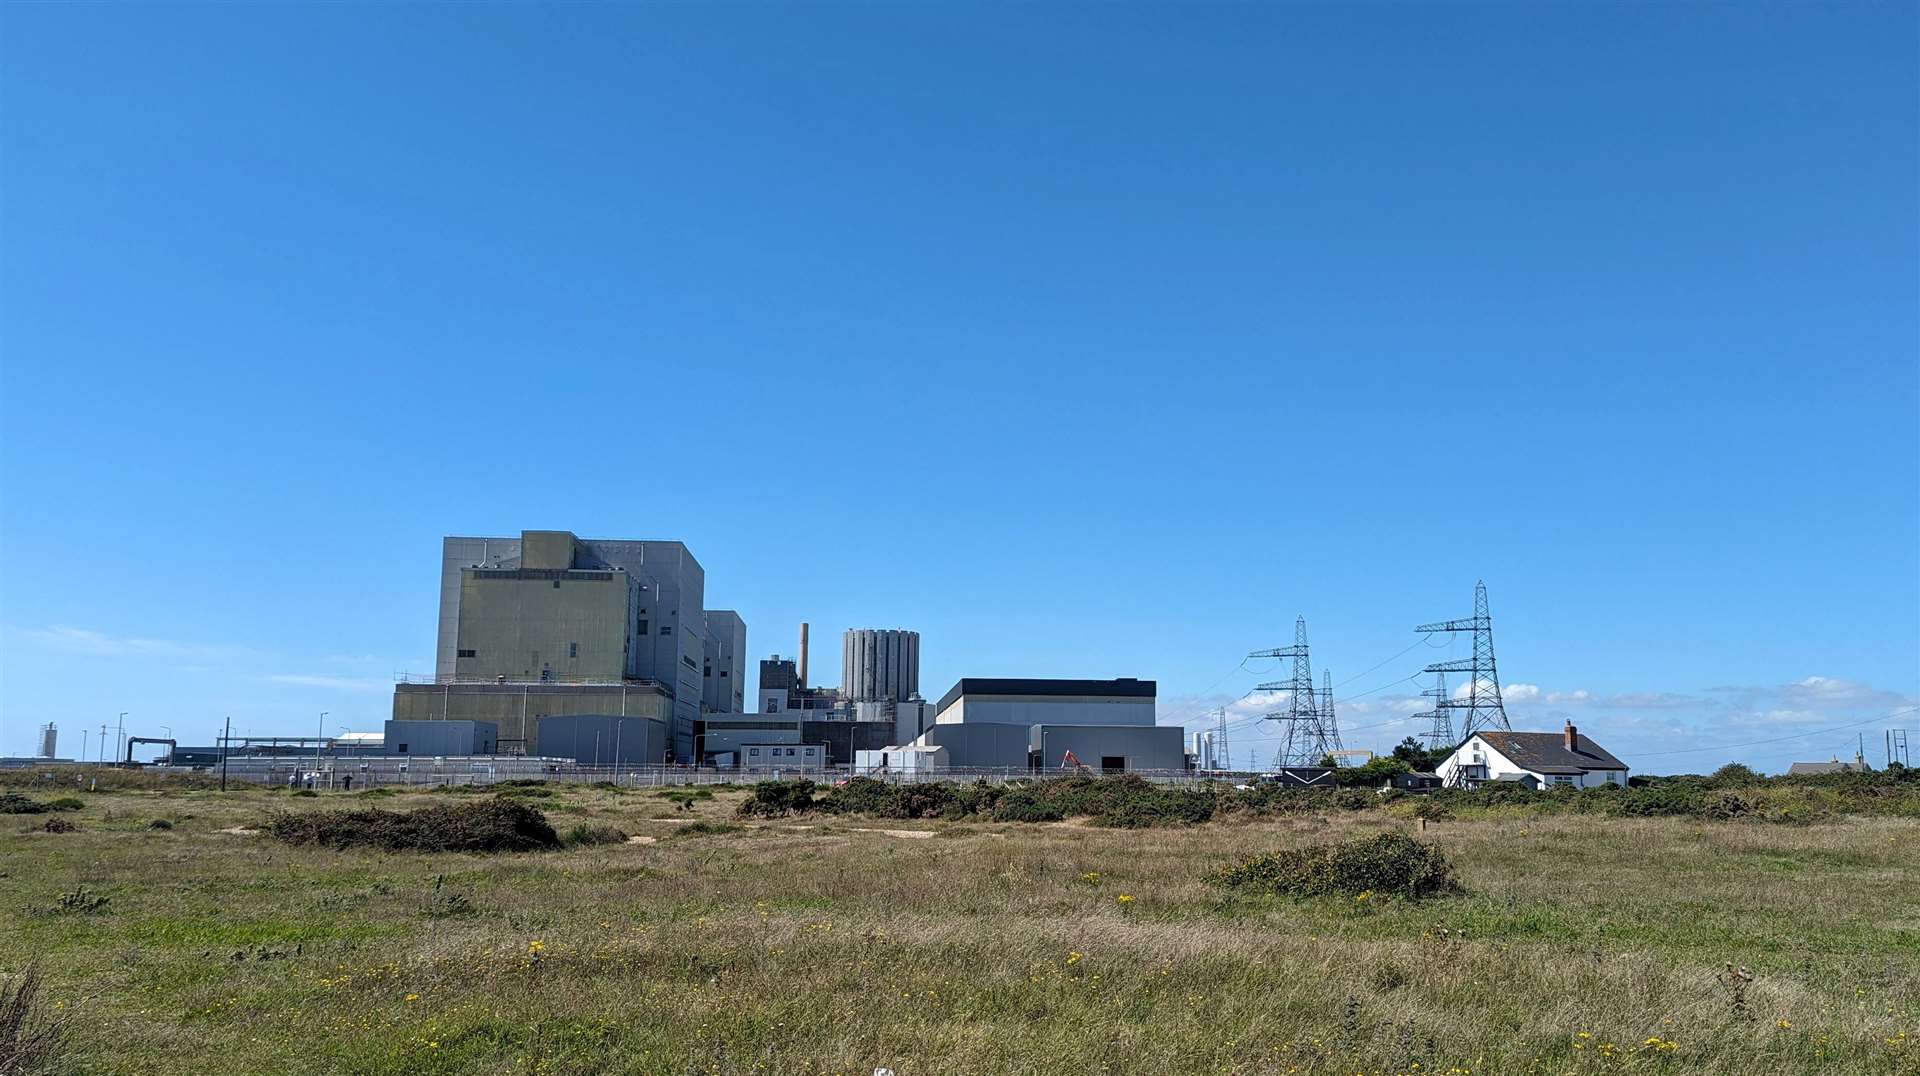 The landmark Dungeness nuclear power station